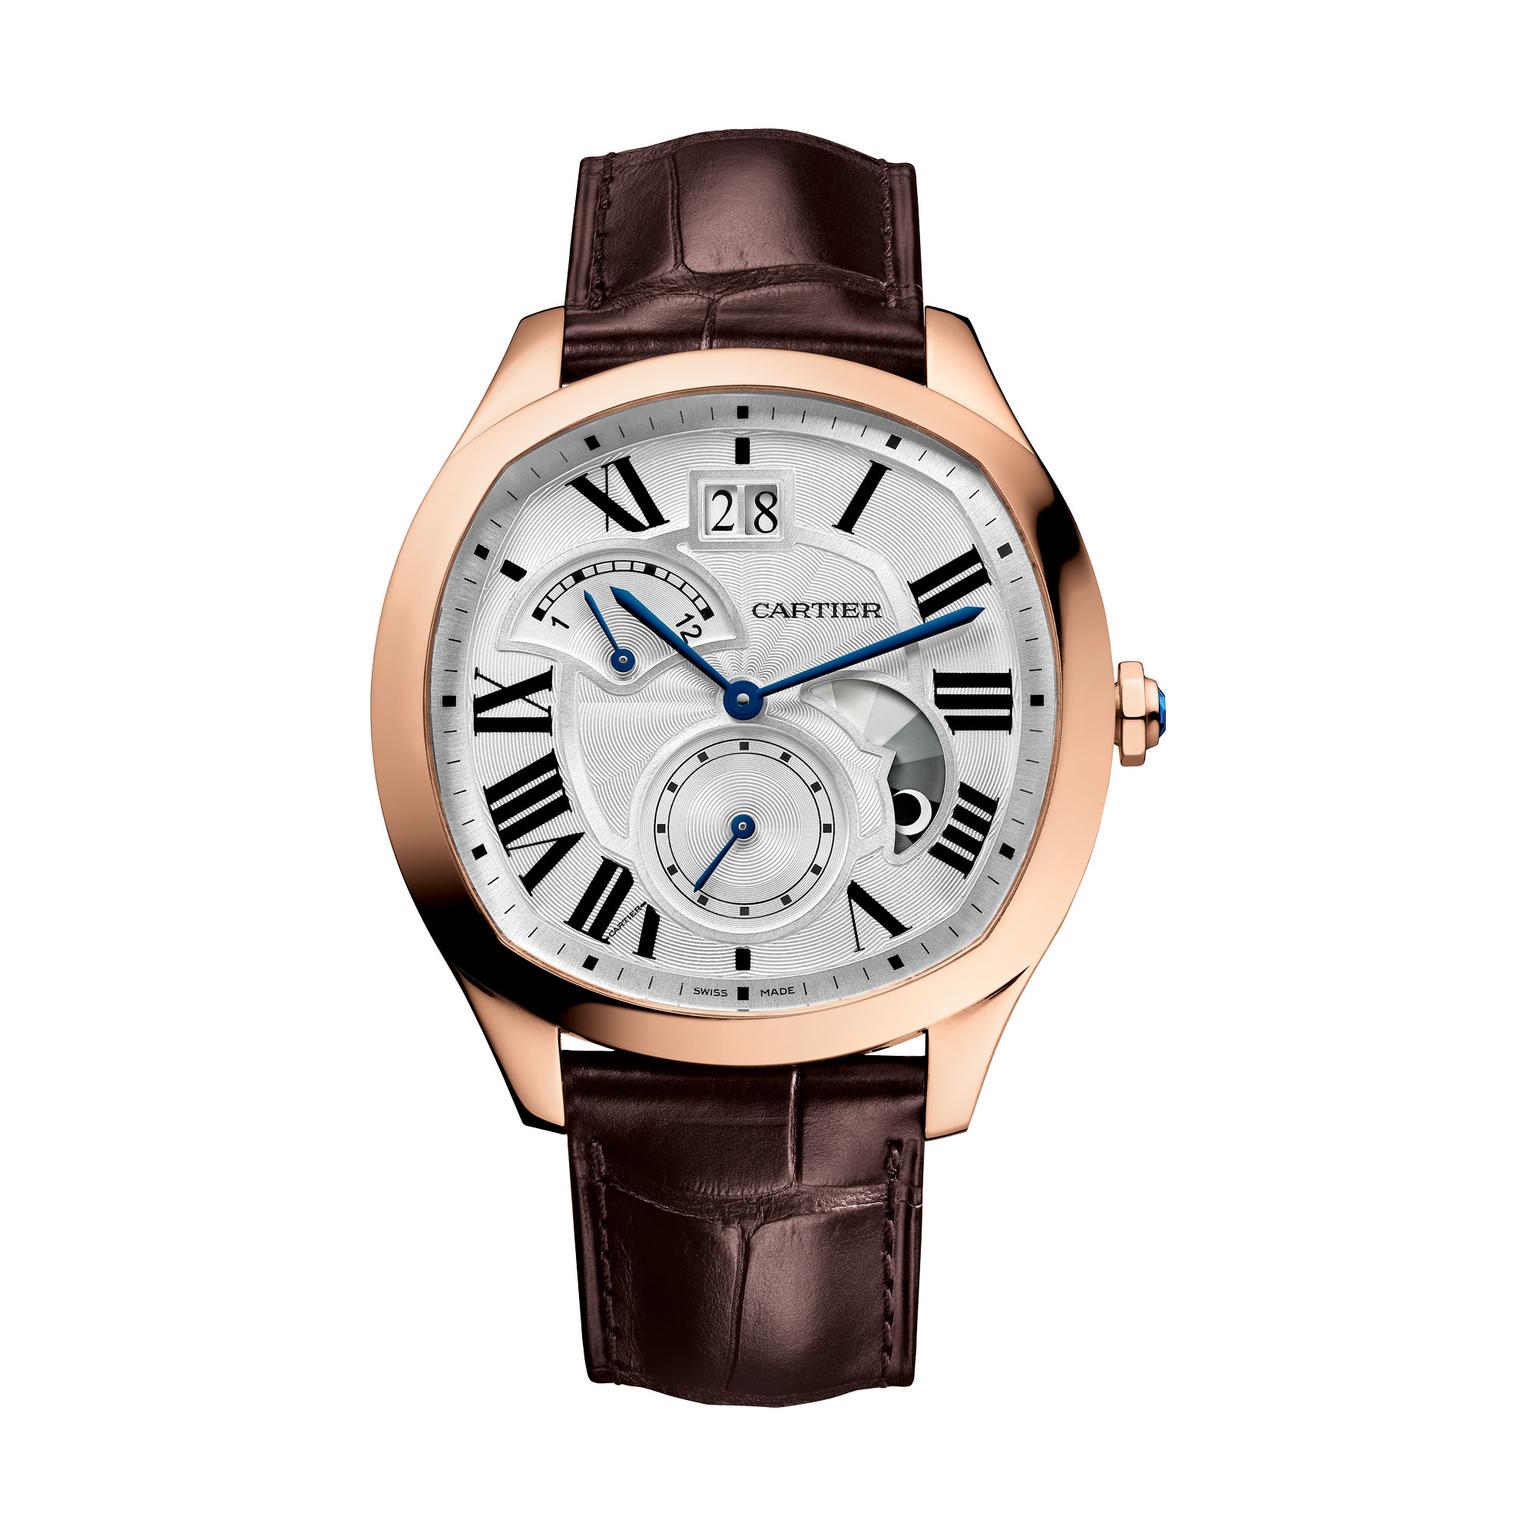 Cartier Drive watch in rose gold